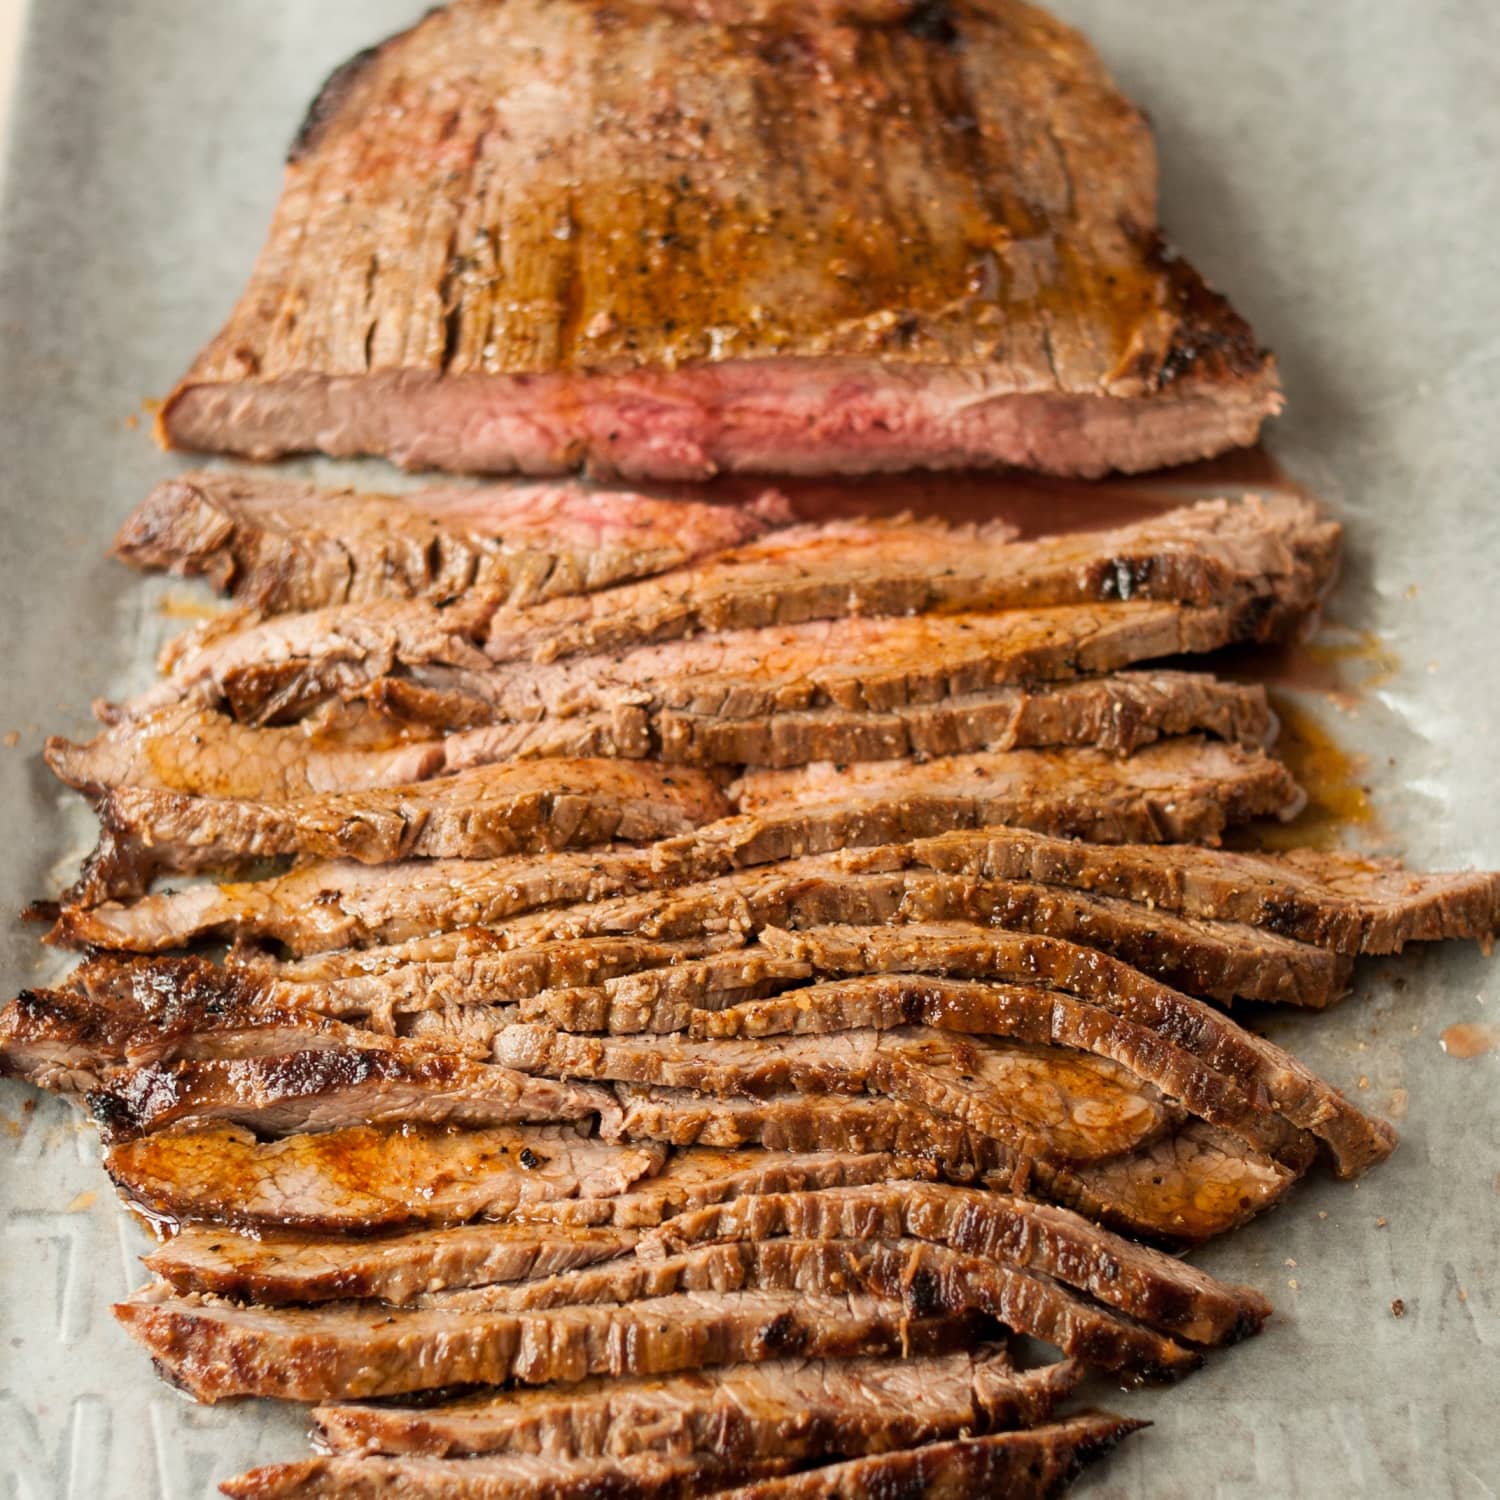 How to grill flank steak - TODAY